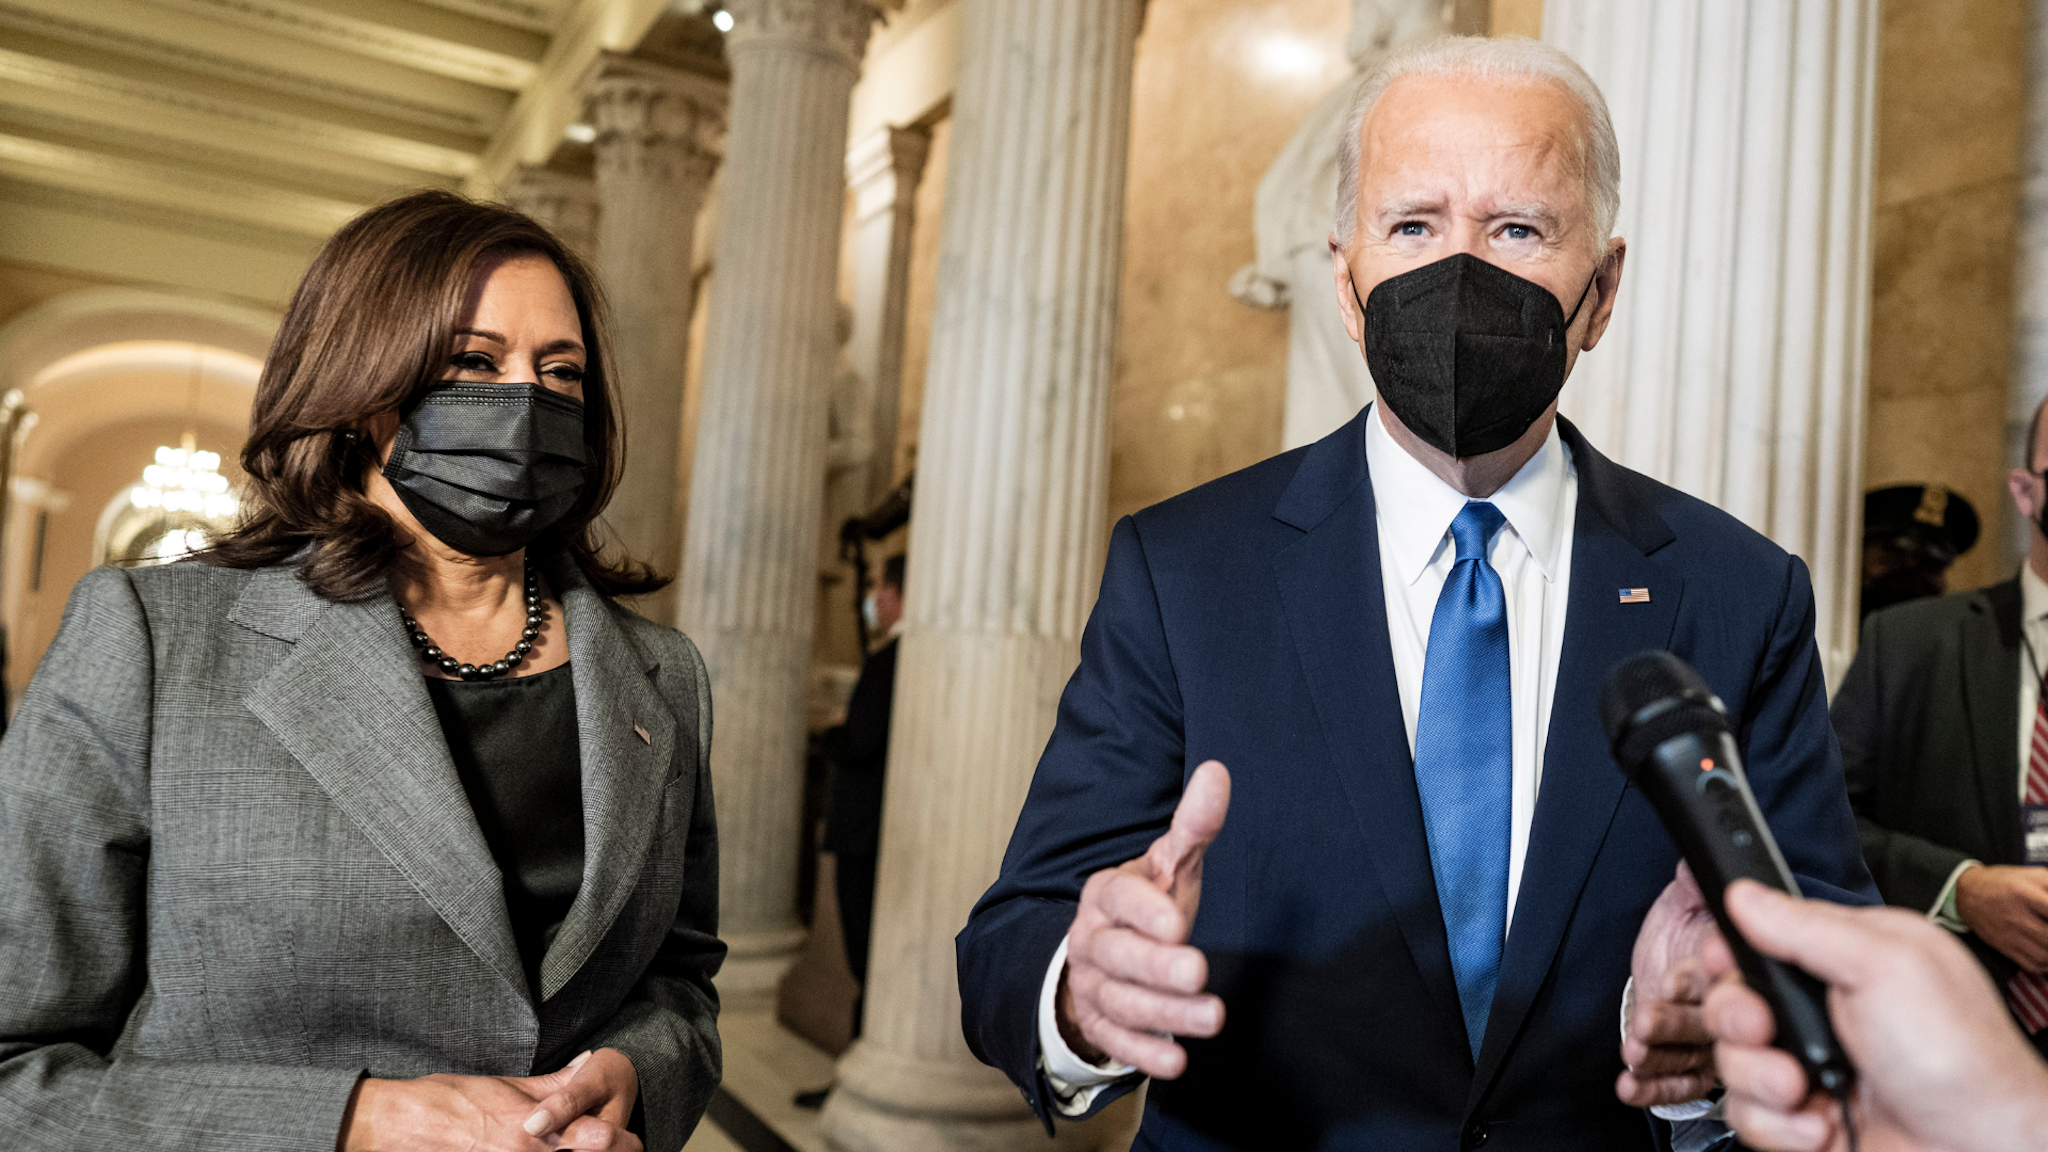 President Joe Biden speaks to the media as he departs with Vice President Kamala Harris after they spoke at the U.S. Capitol on January 6, 2022 in Washington, DC.